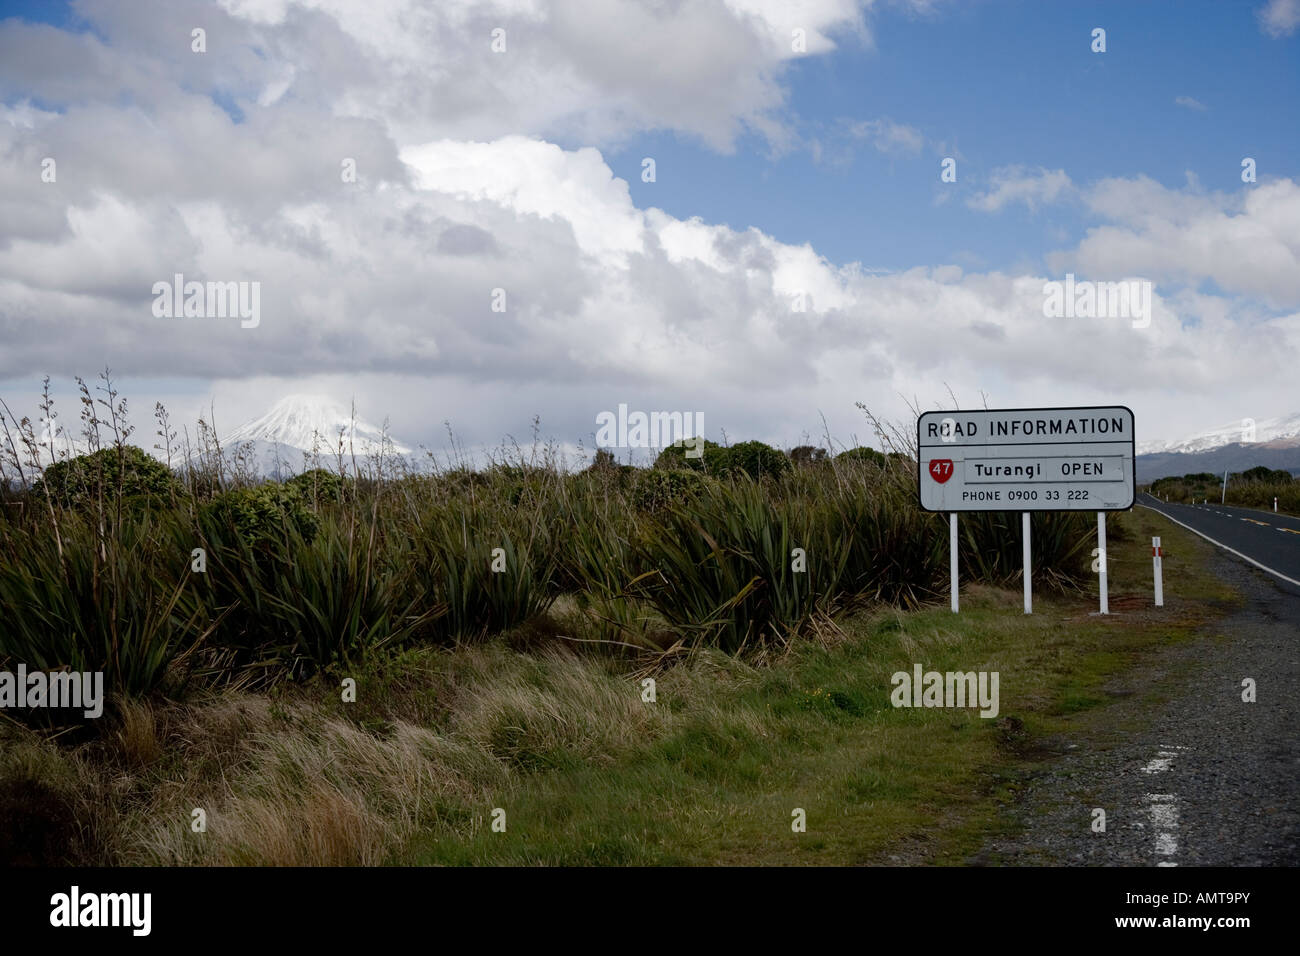 A road information sign in New Zealand Stock Photo